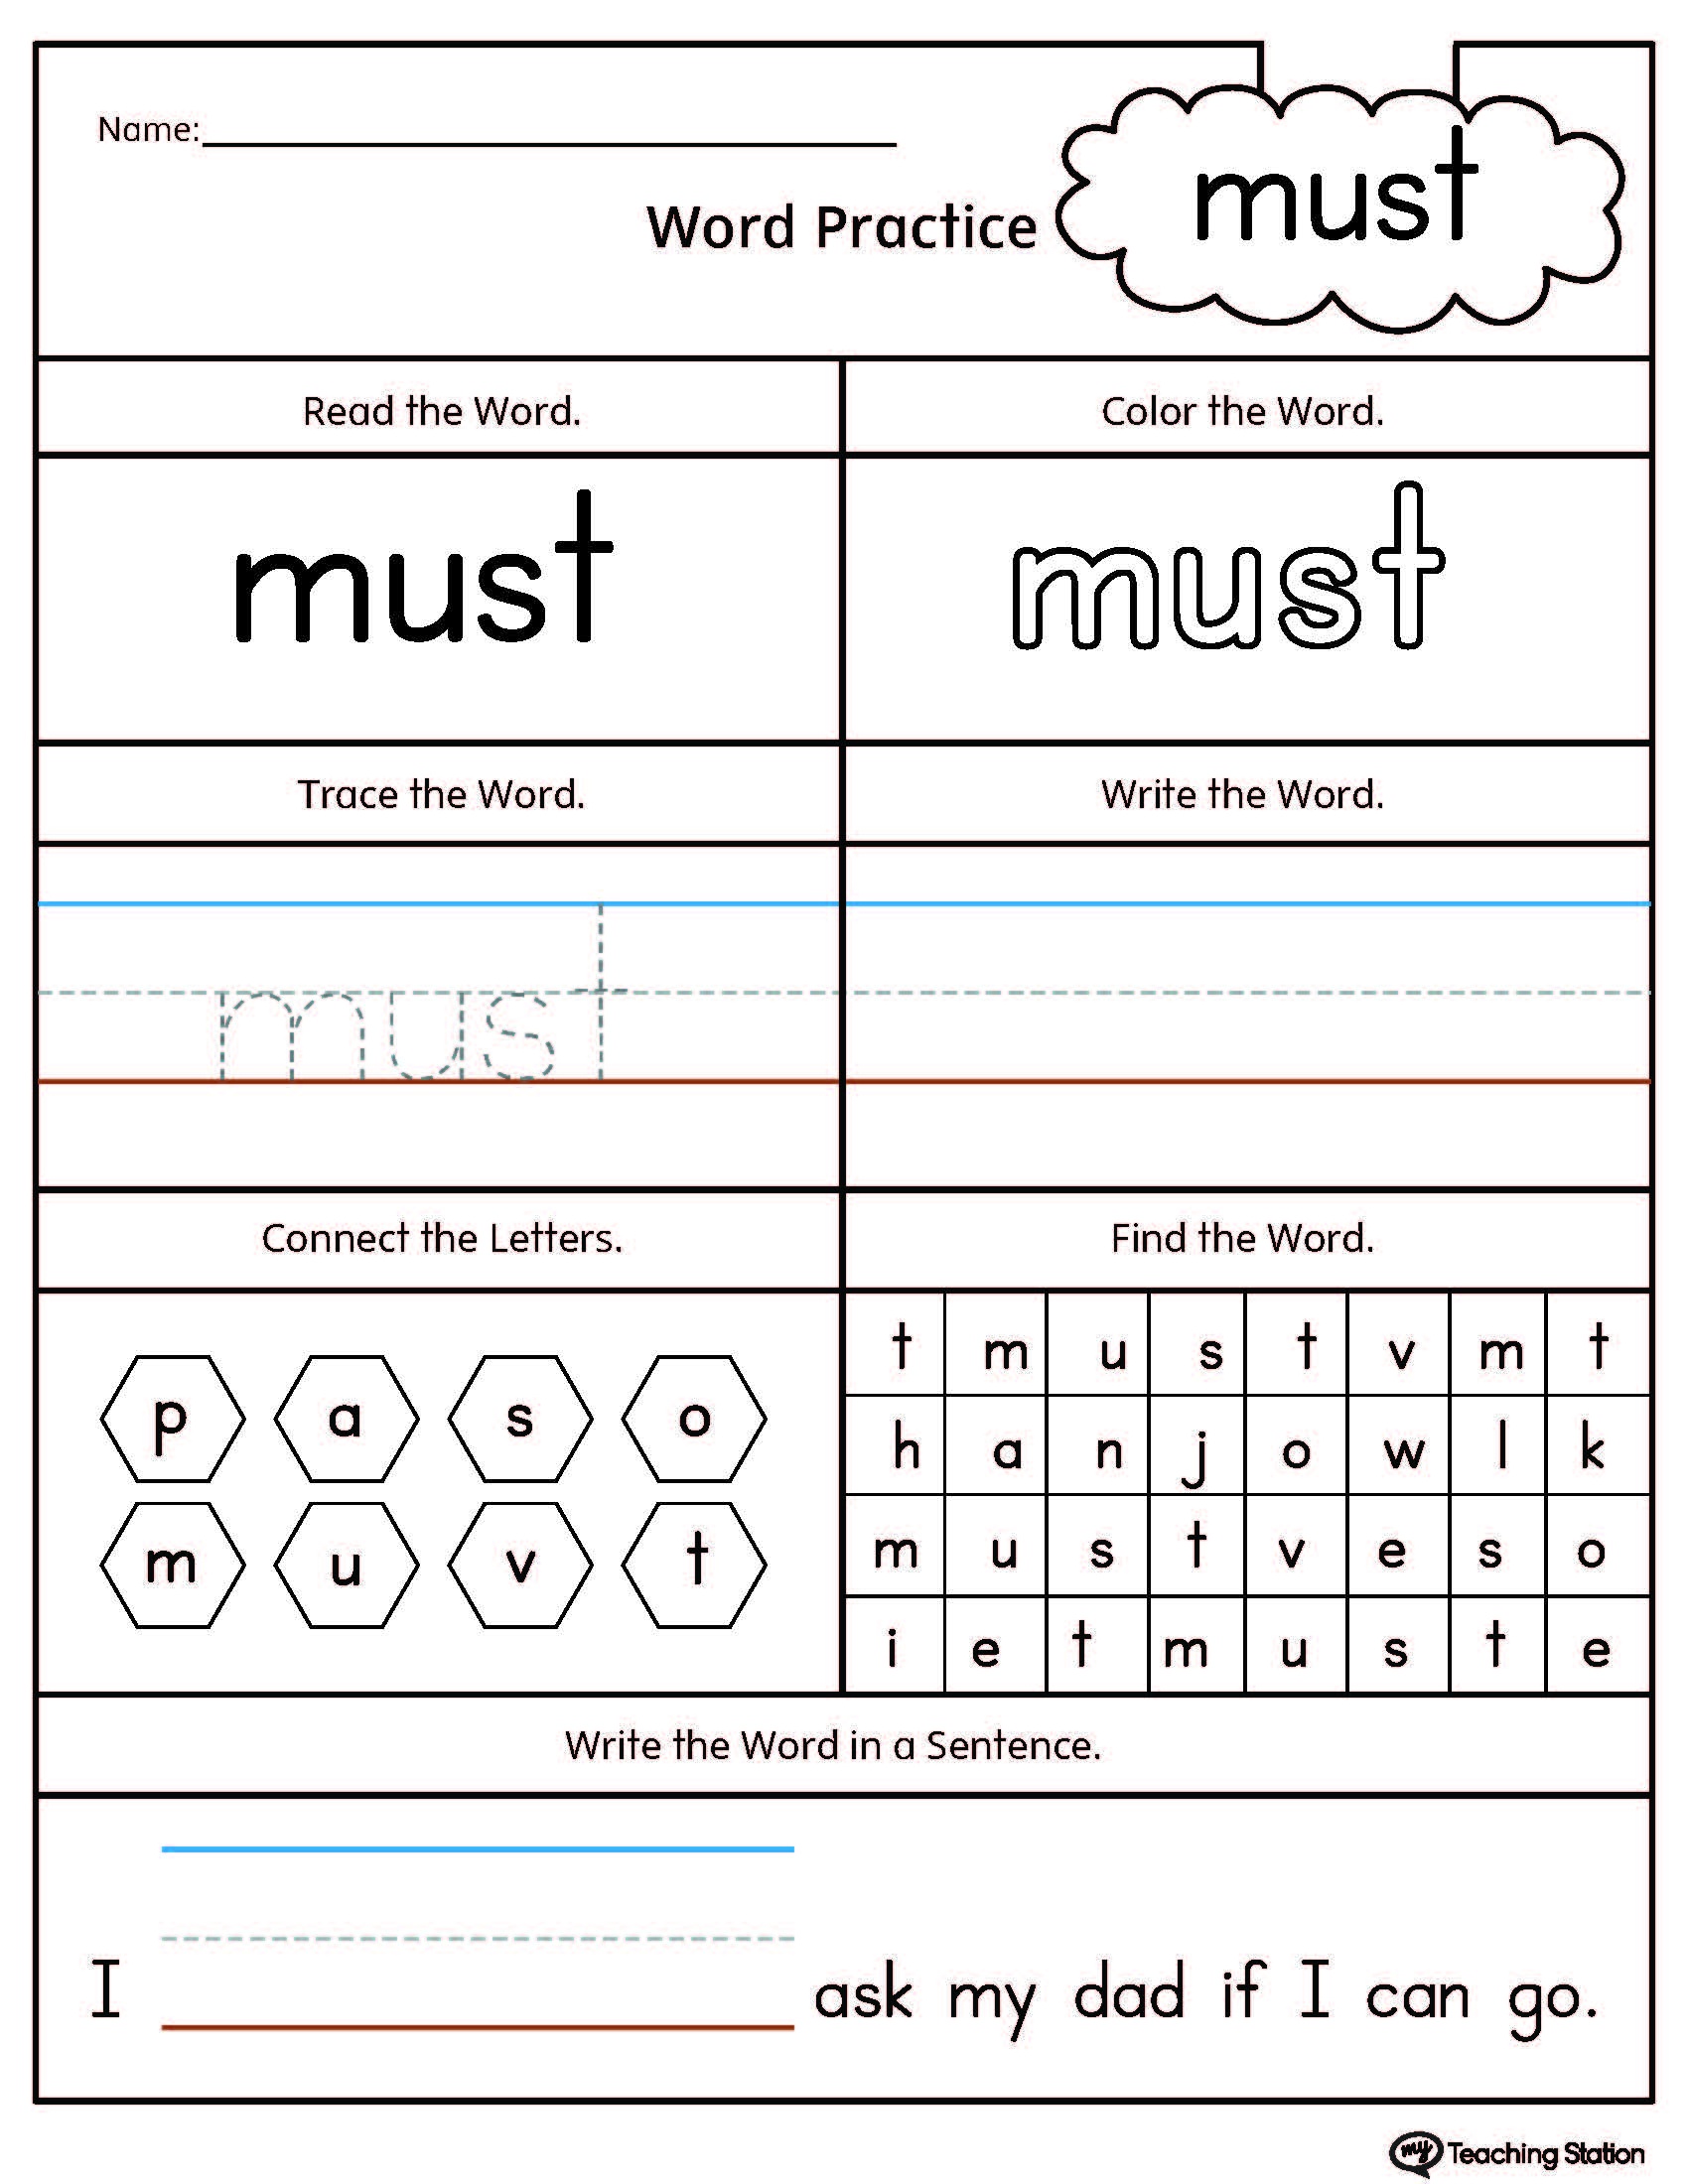 Free Printable Sight Word Reading Passages | Free Printable